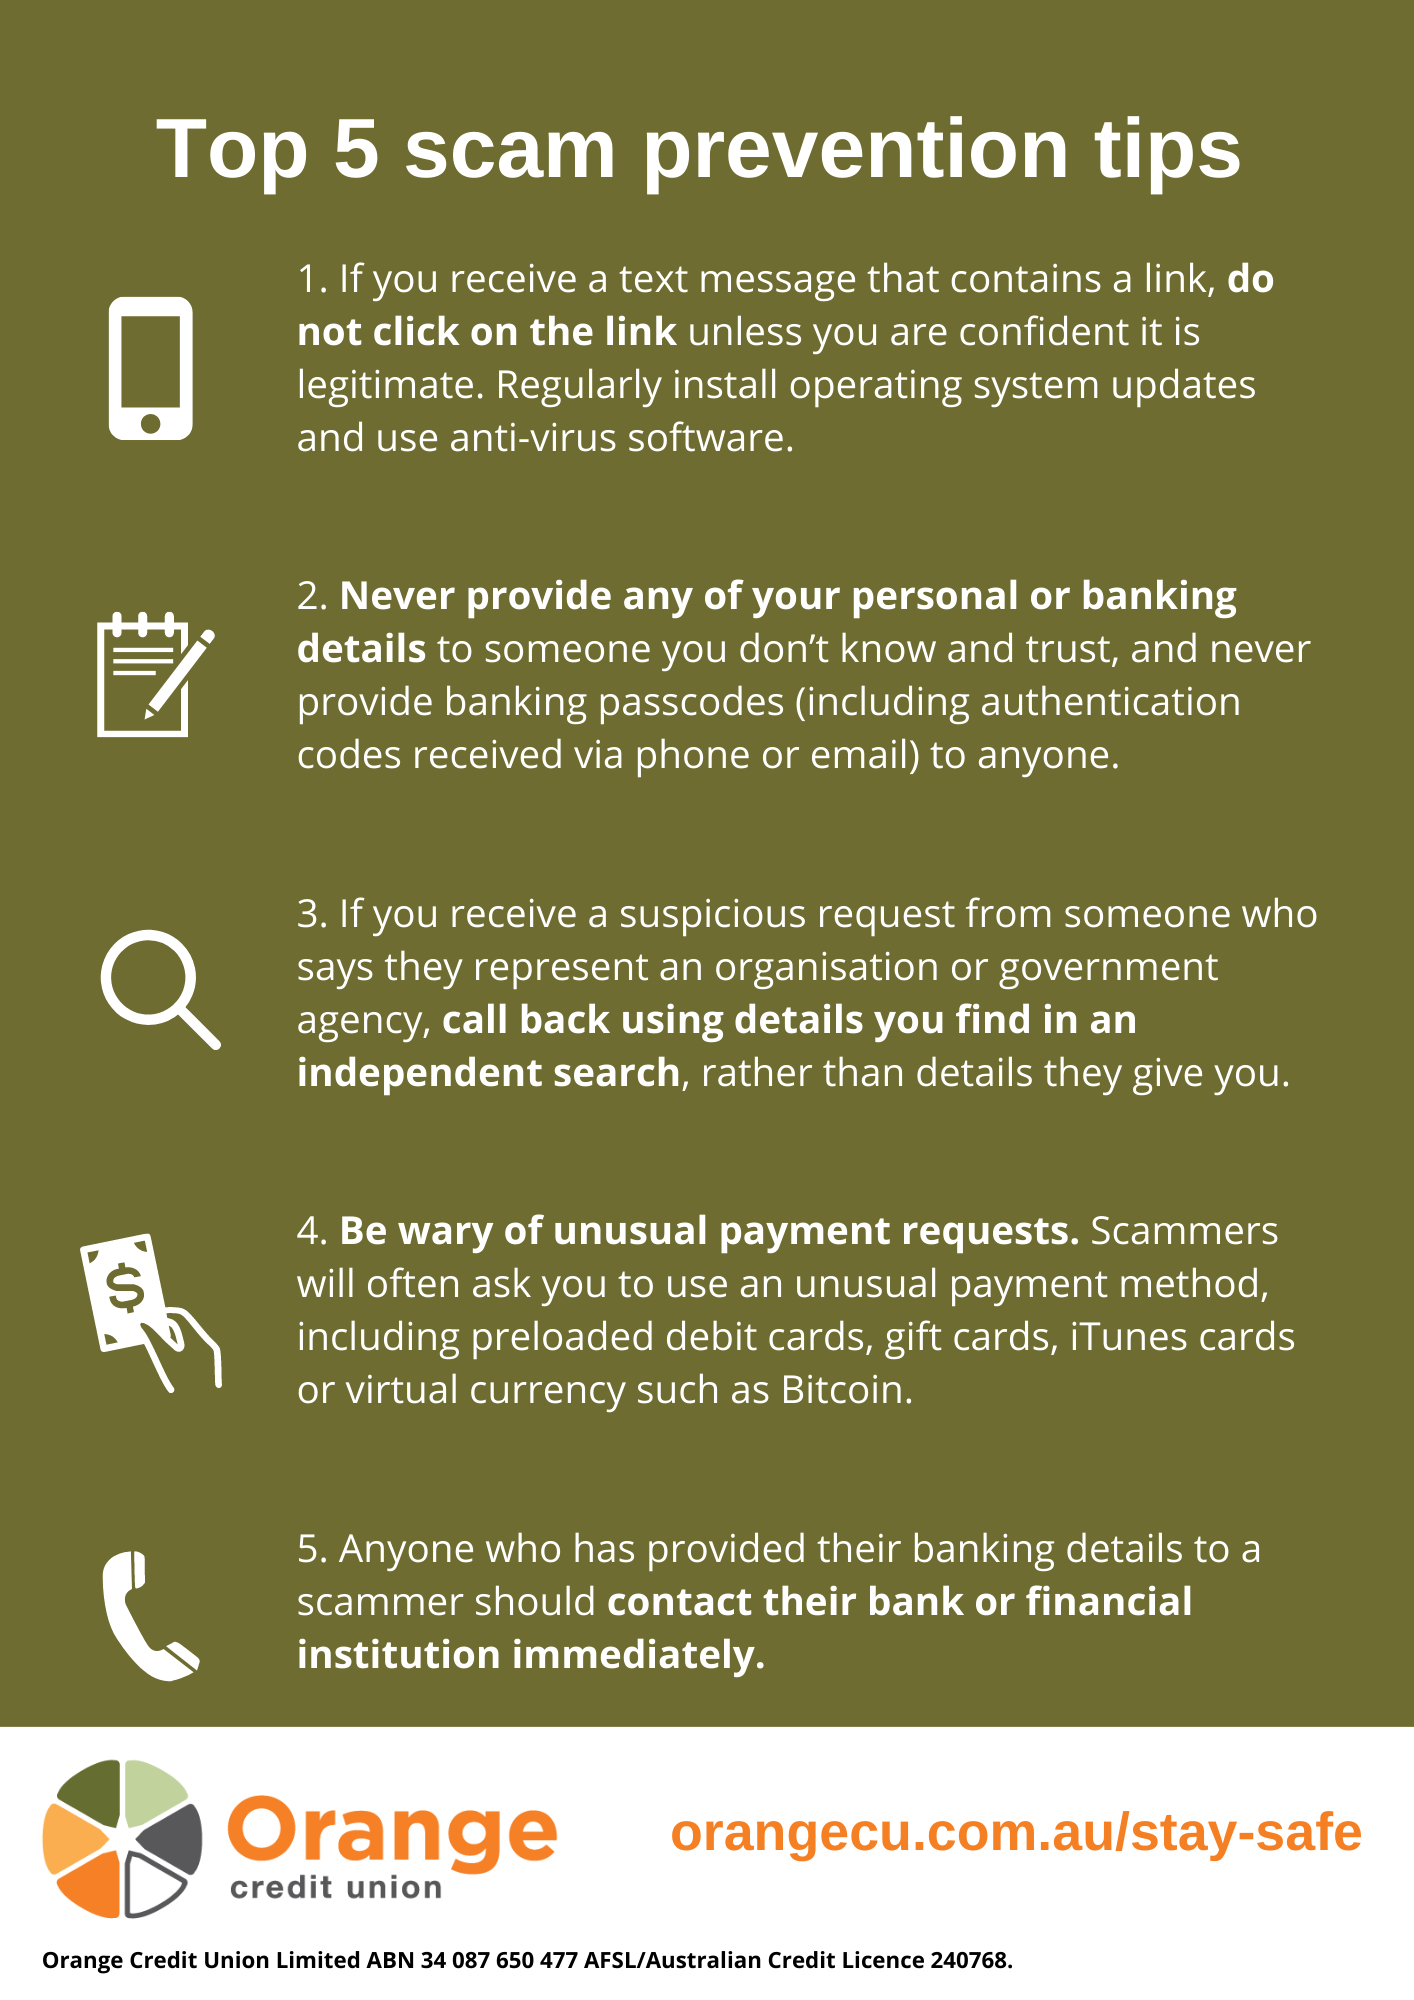 Top 5 Scam Prevention Tips